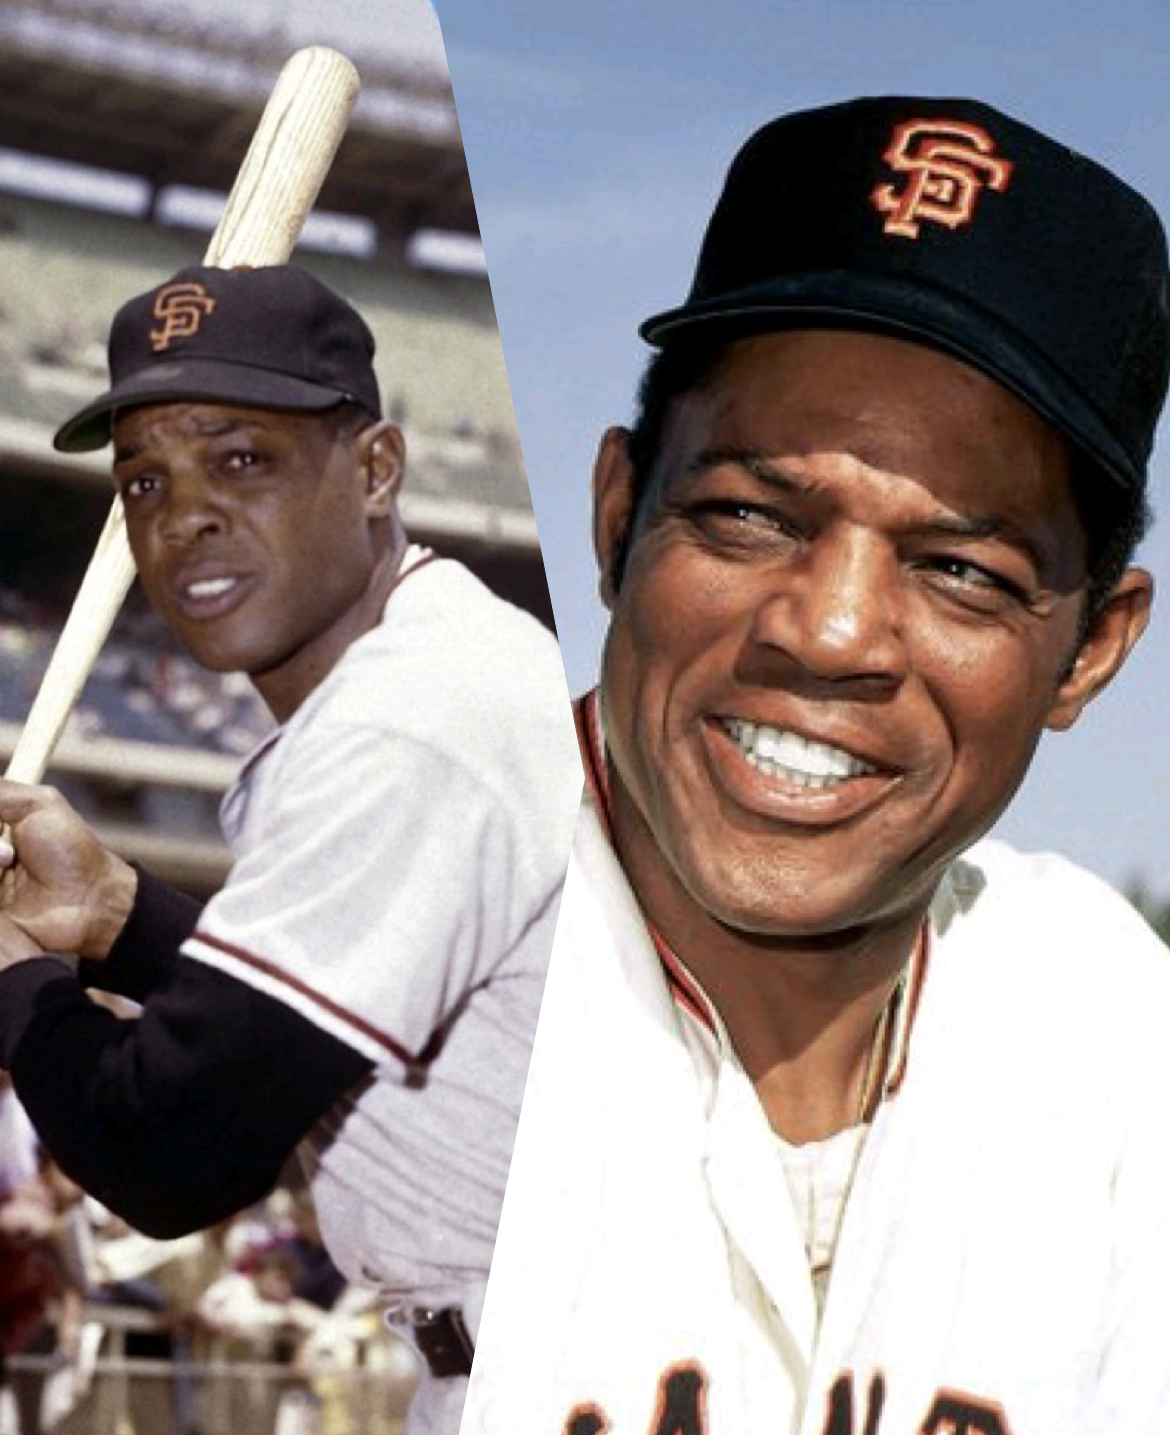 Willie Mays Final Message to Major League Baseball Fans